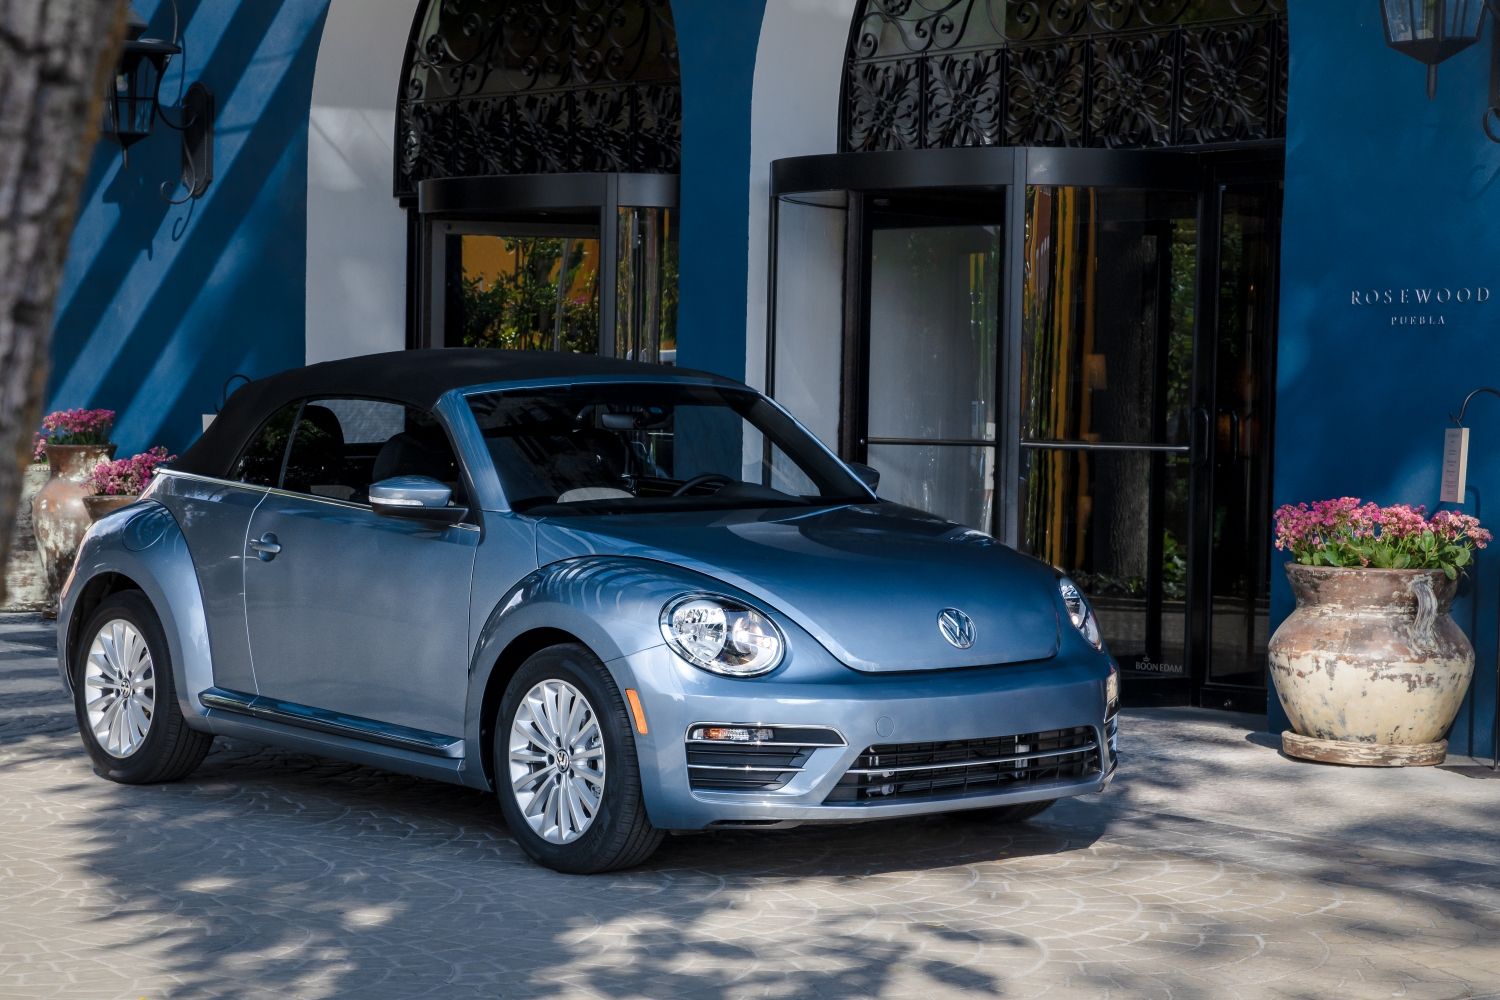 2019 Volkswagen Beetle Final Edition first drive: Farewell … for now